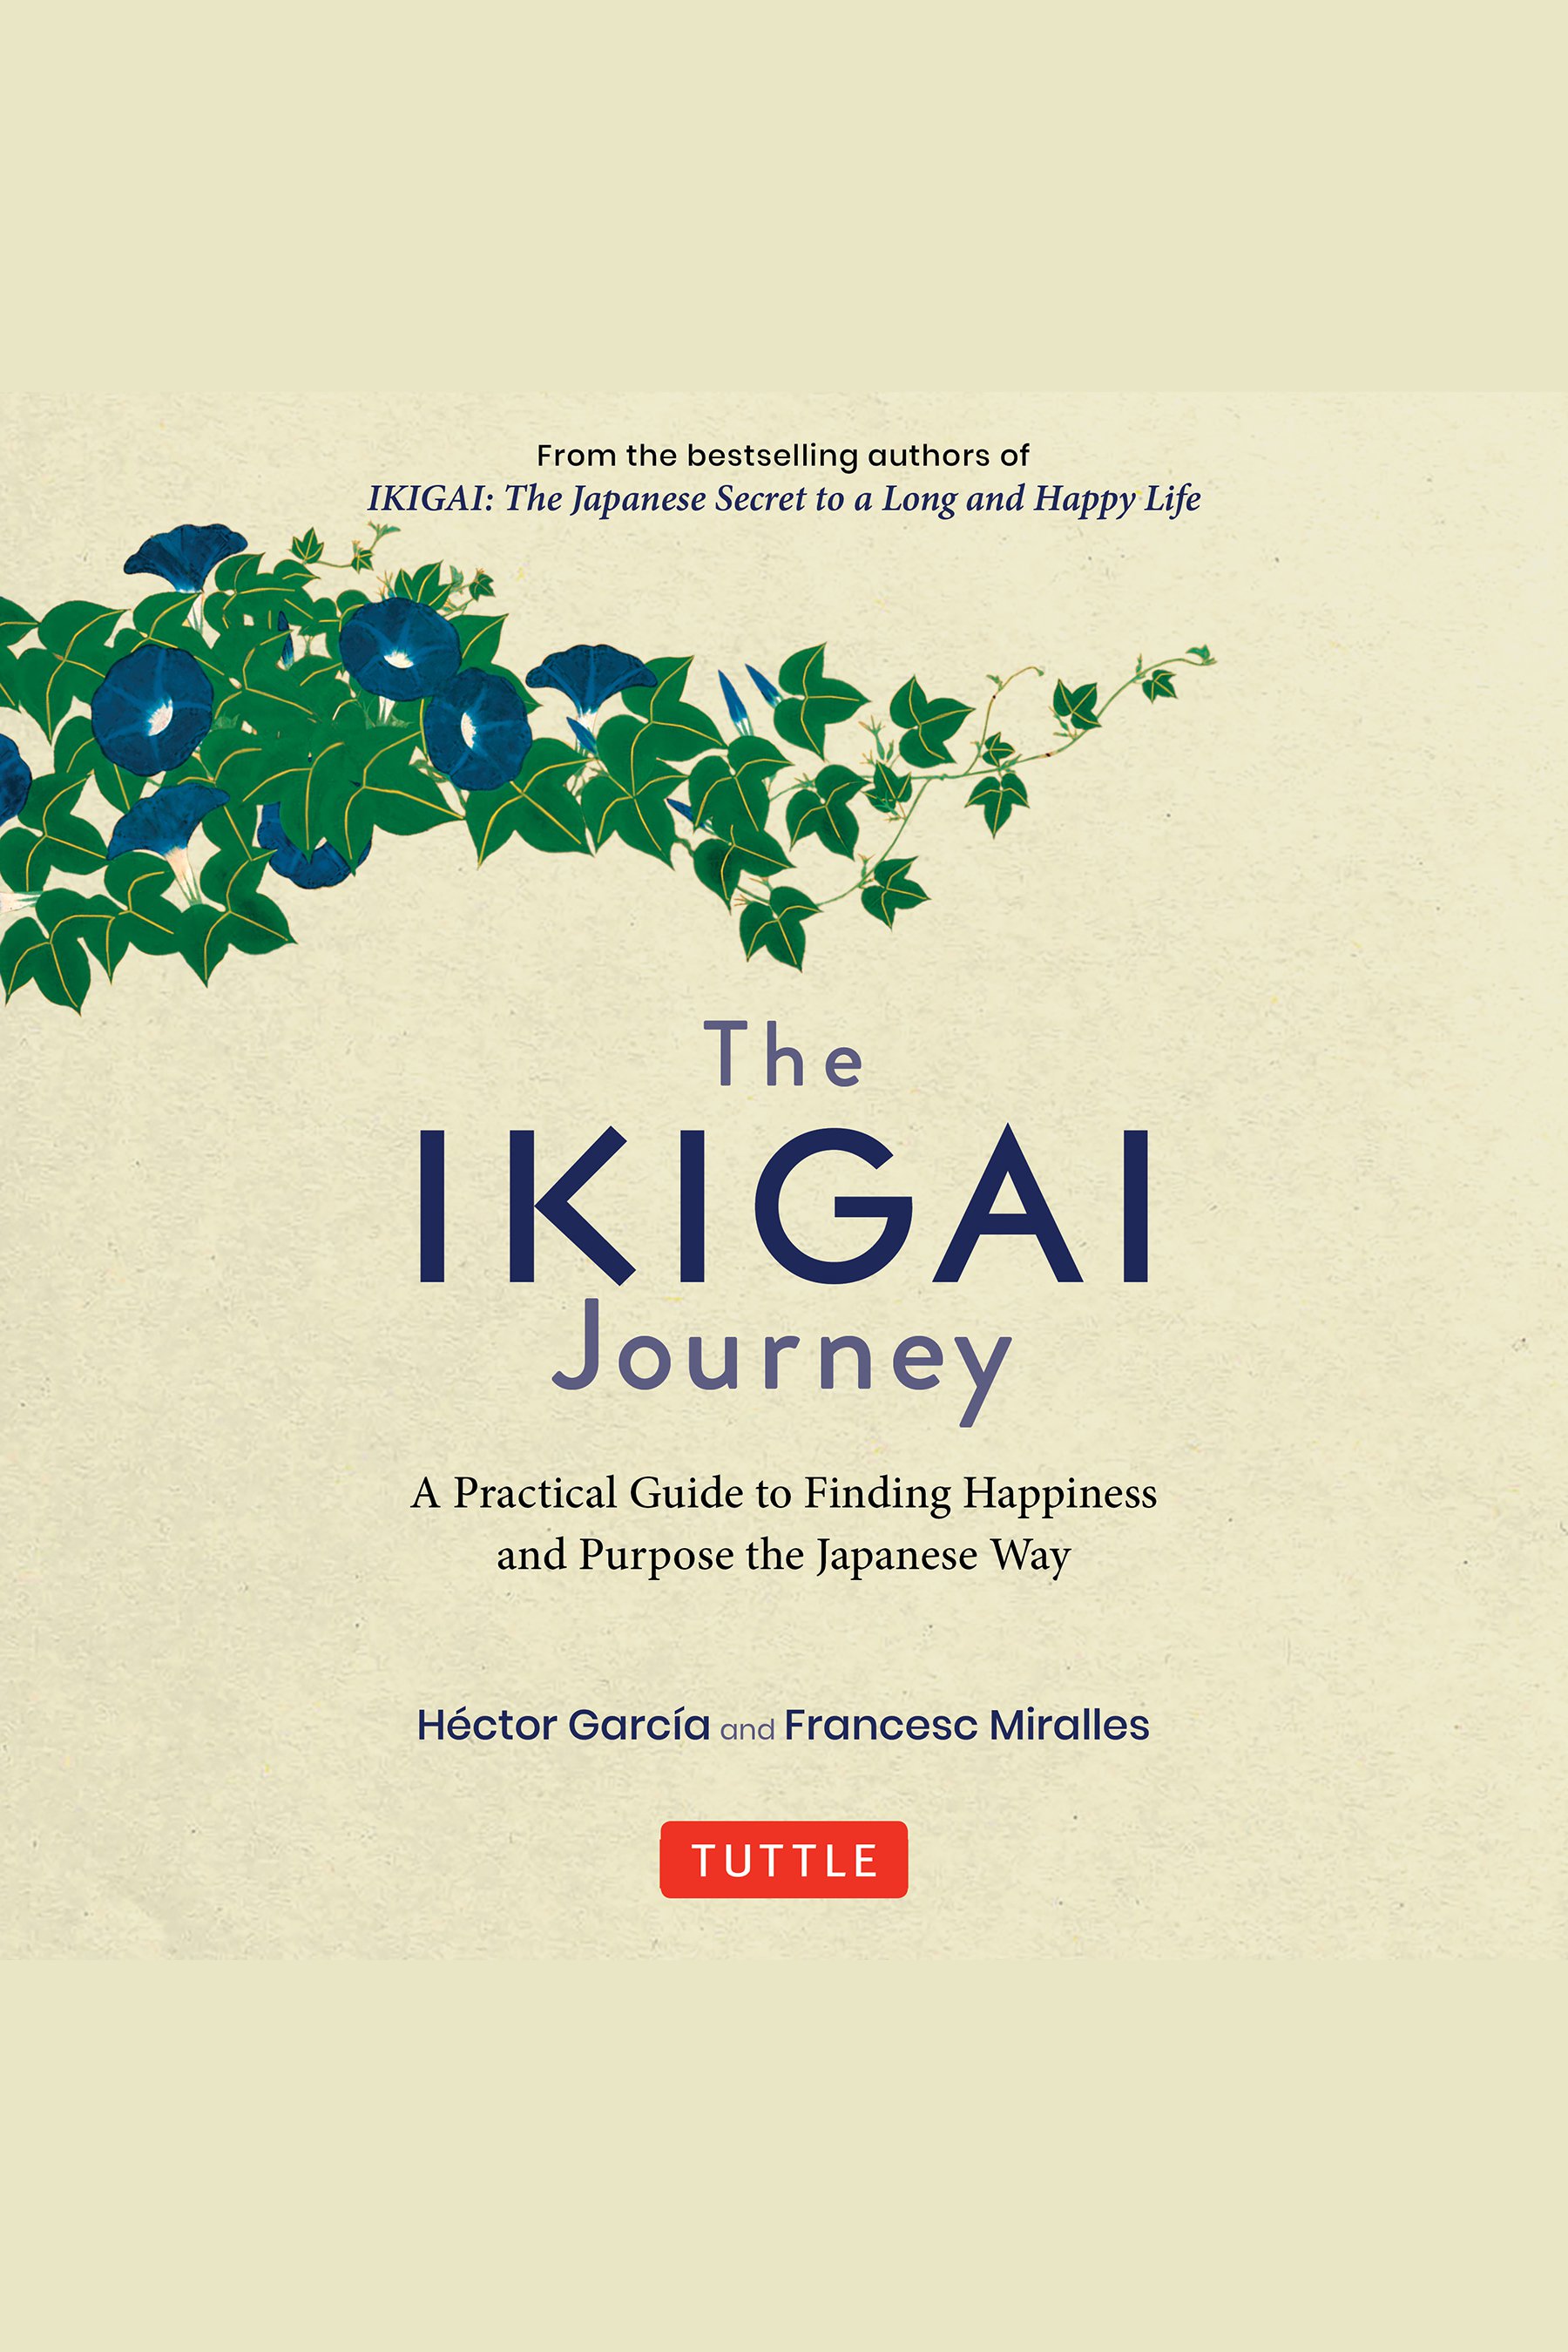 Imagen de portada para Ikigai Journey, The [electronic resource] : A Practical Guide to Finding Happiness and Purpose the Japanese Way